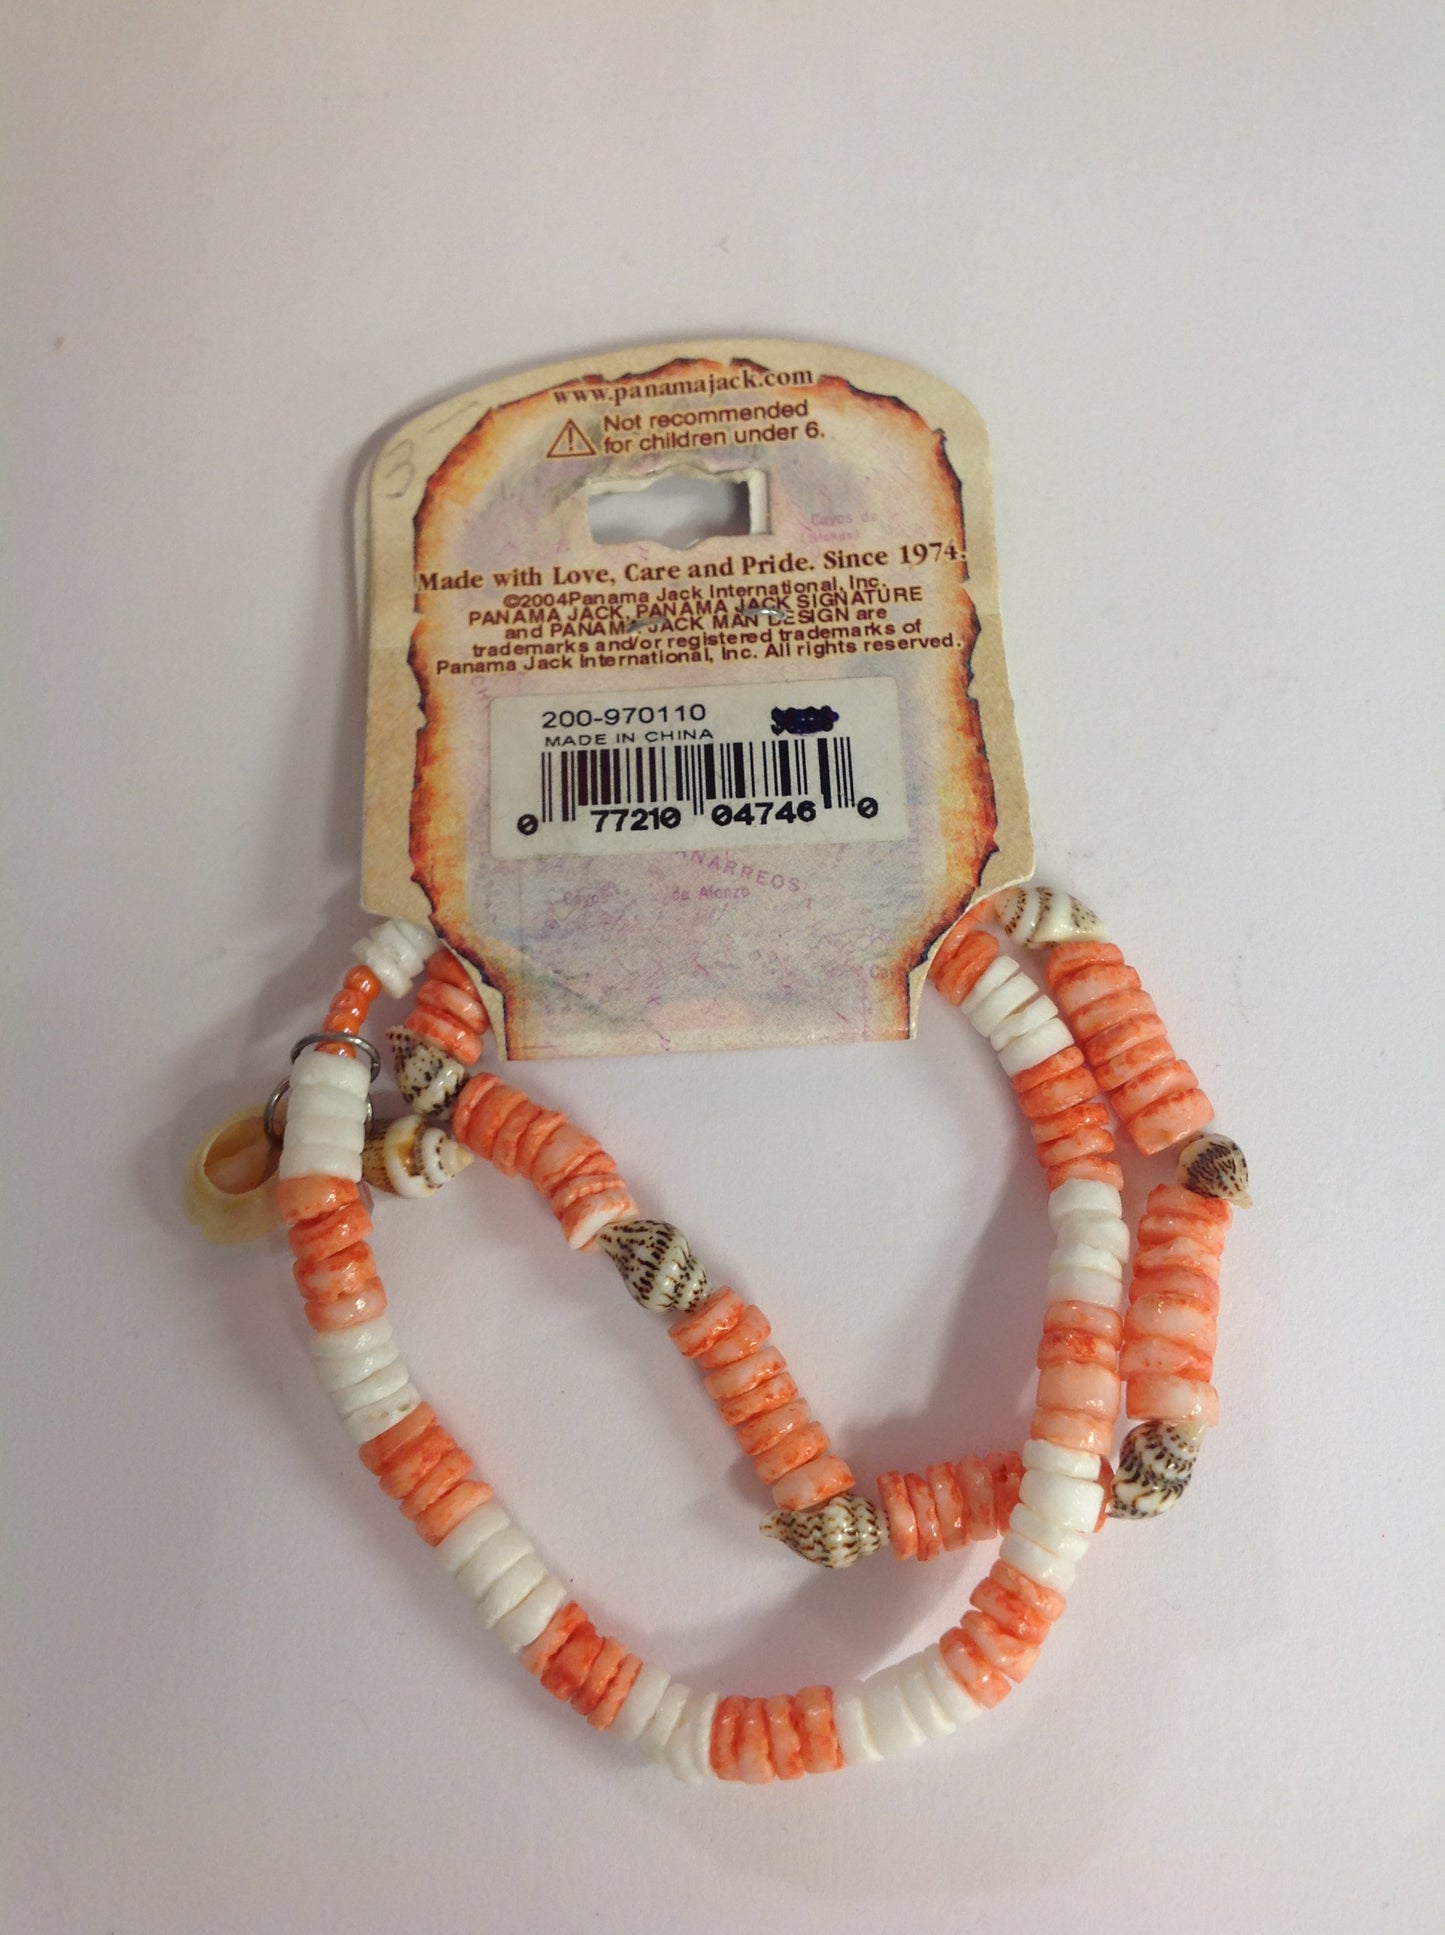 Vintage Authentic Panama Jack Duo Ankle Bracelet in Salmon and White Beads with Shell Accent